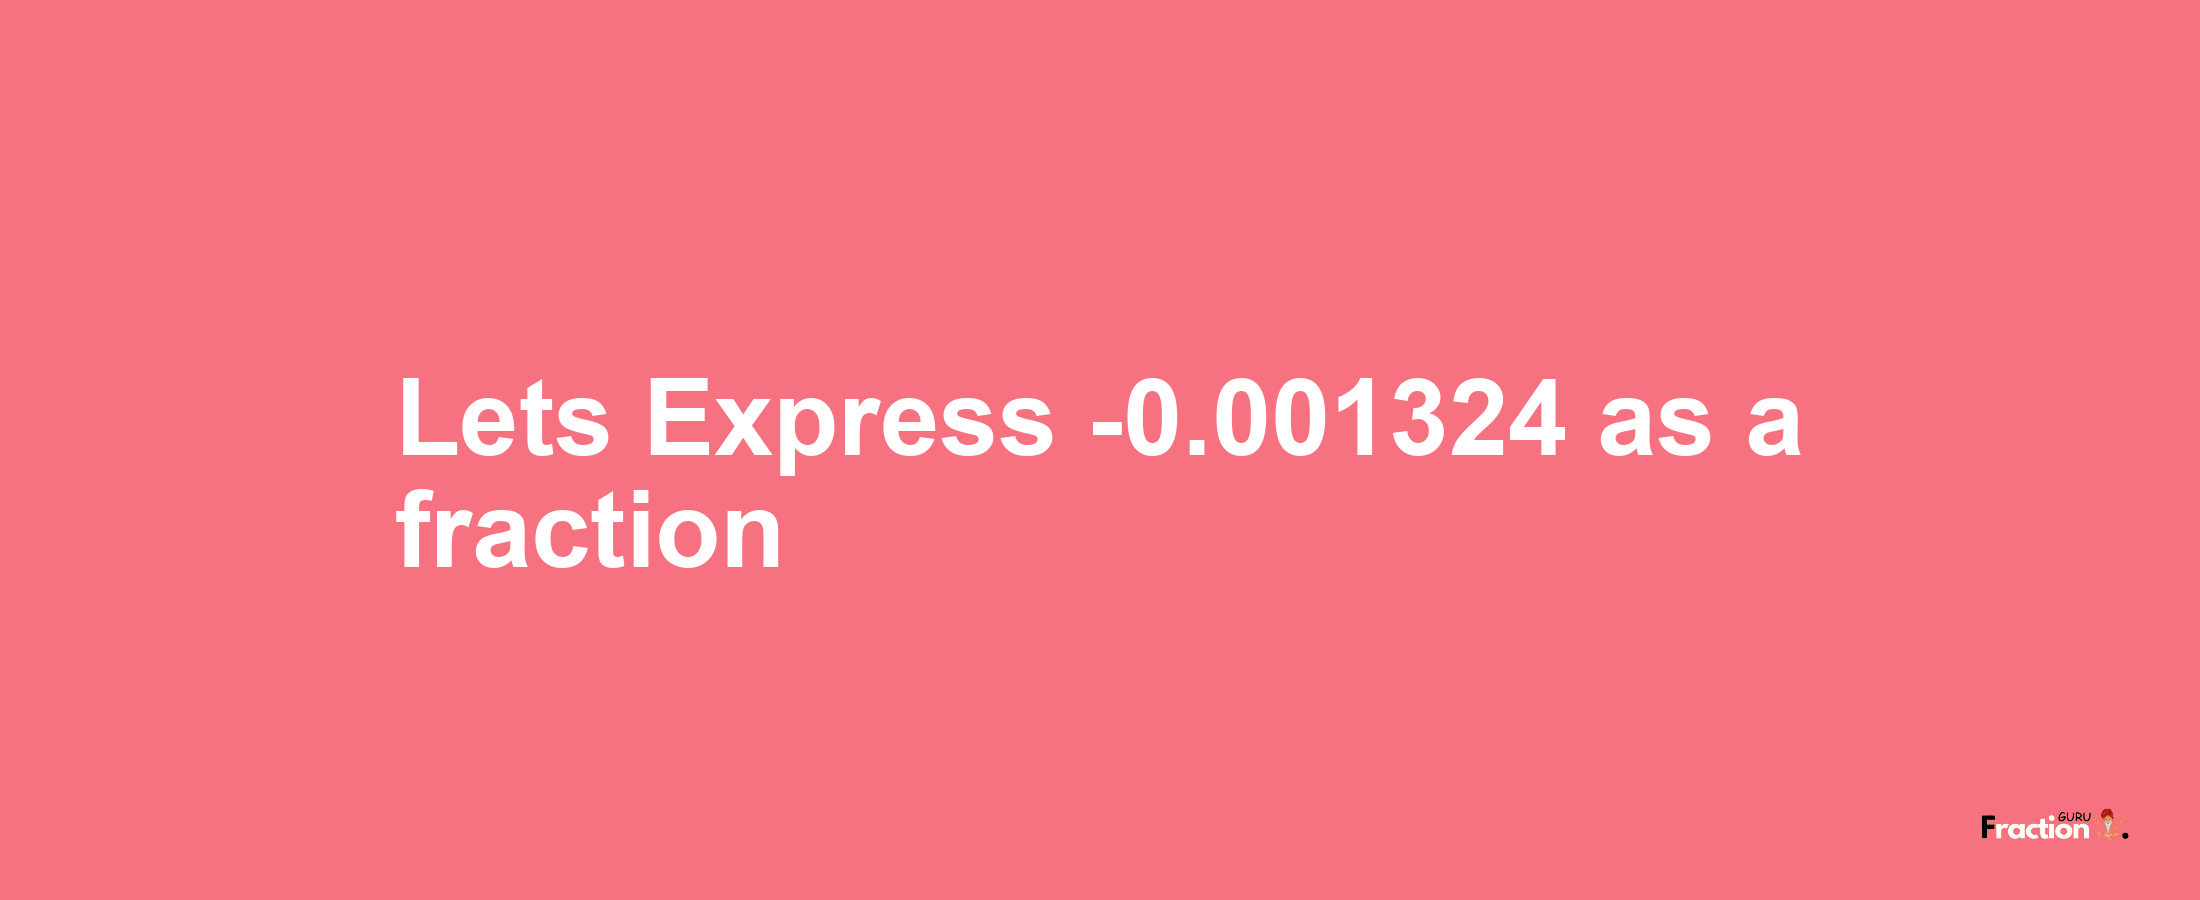 Lets Express -0.001324 as afraction